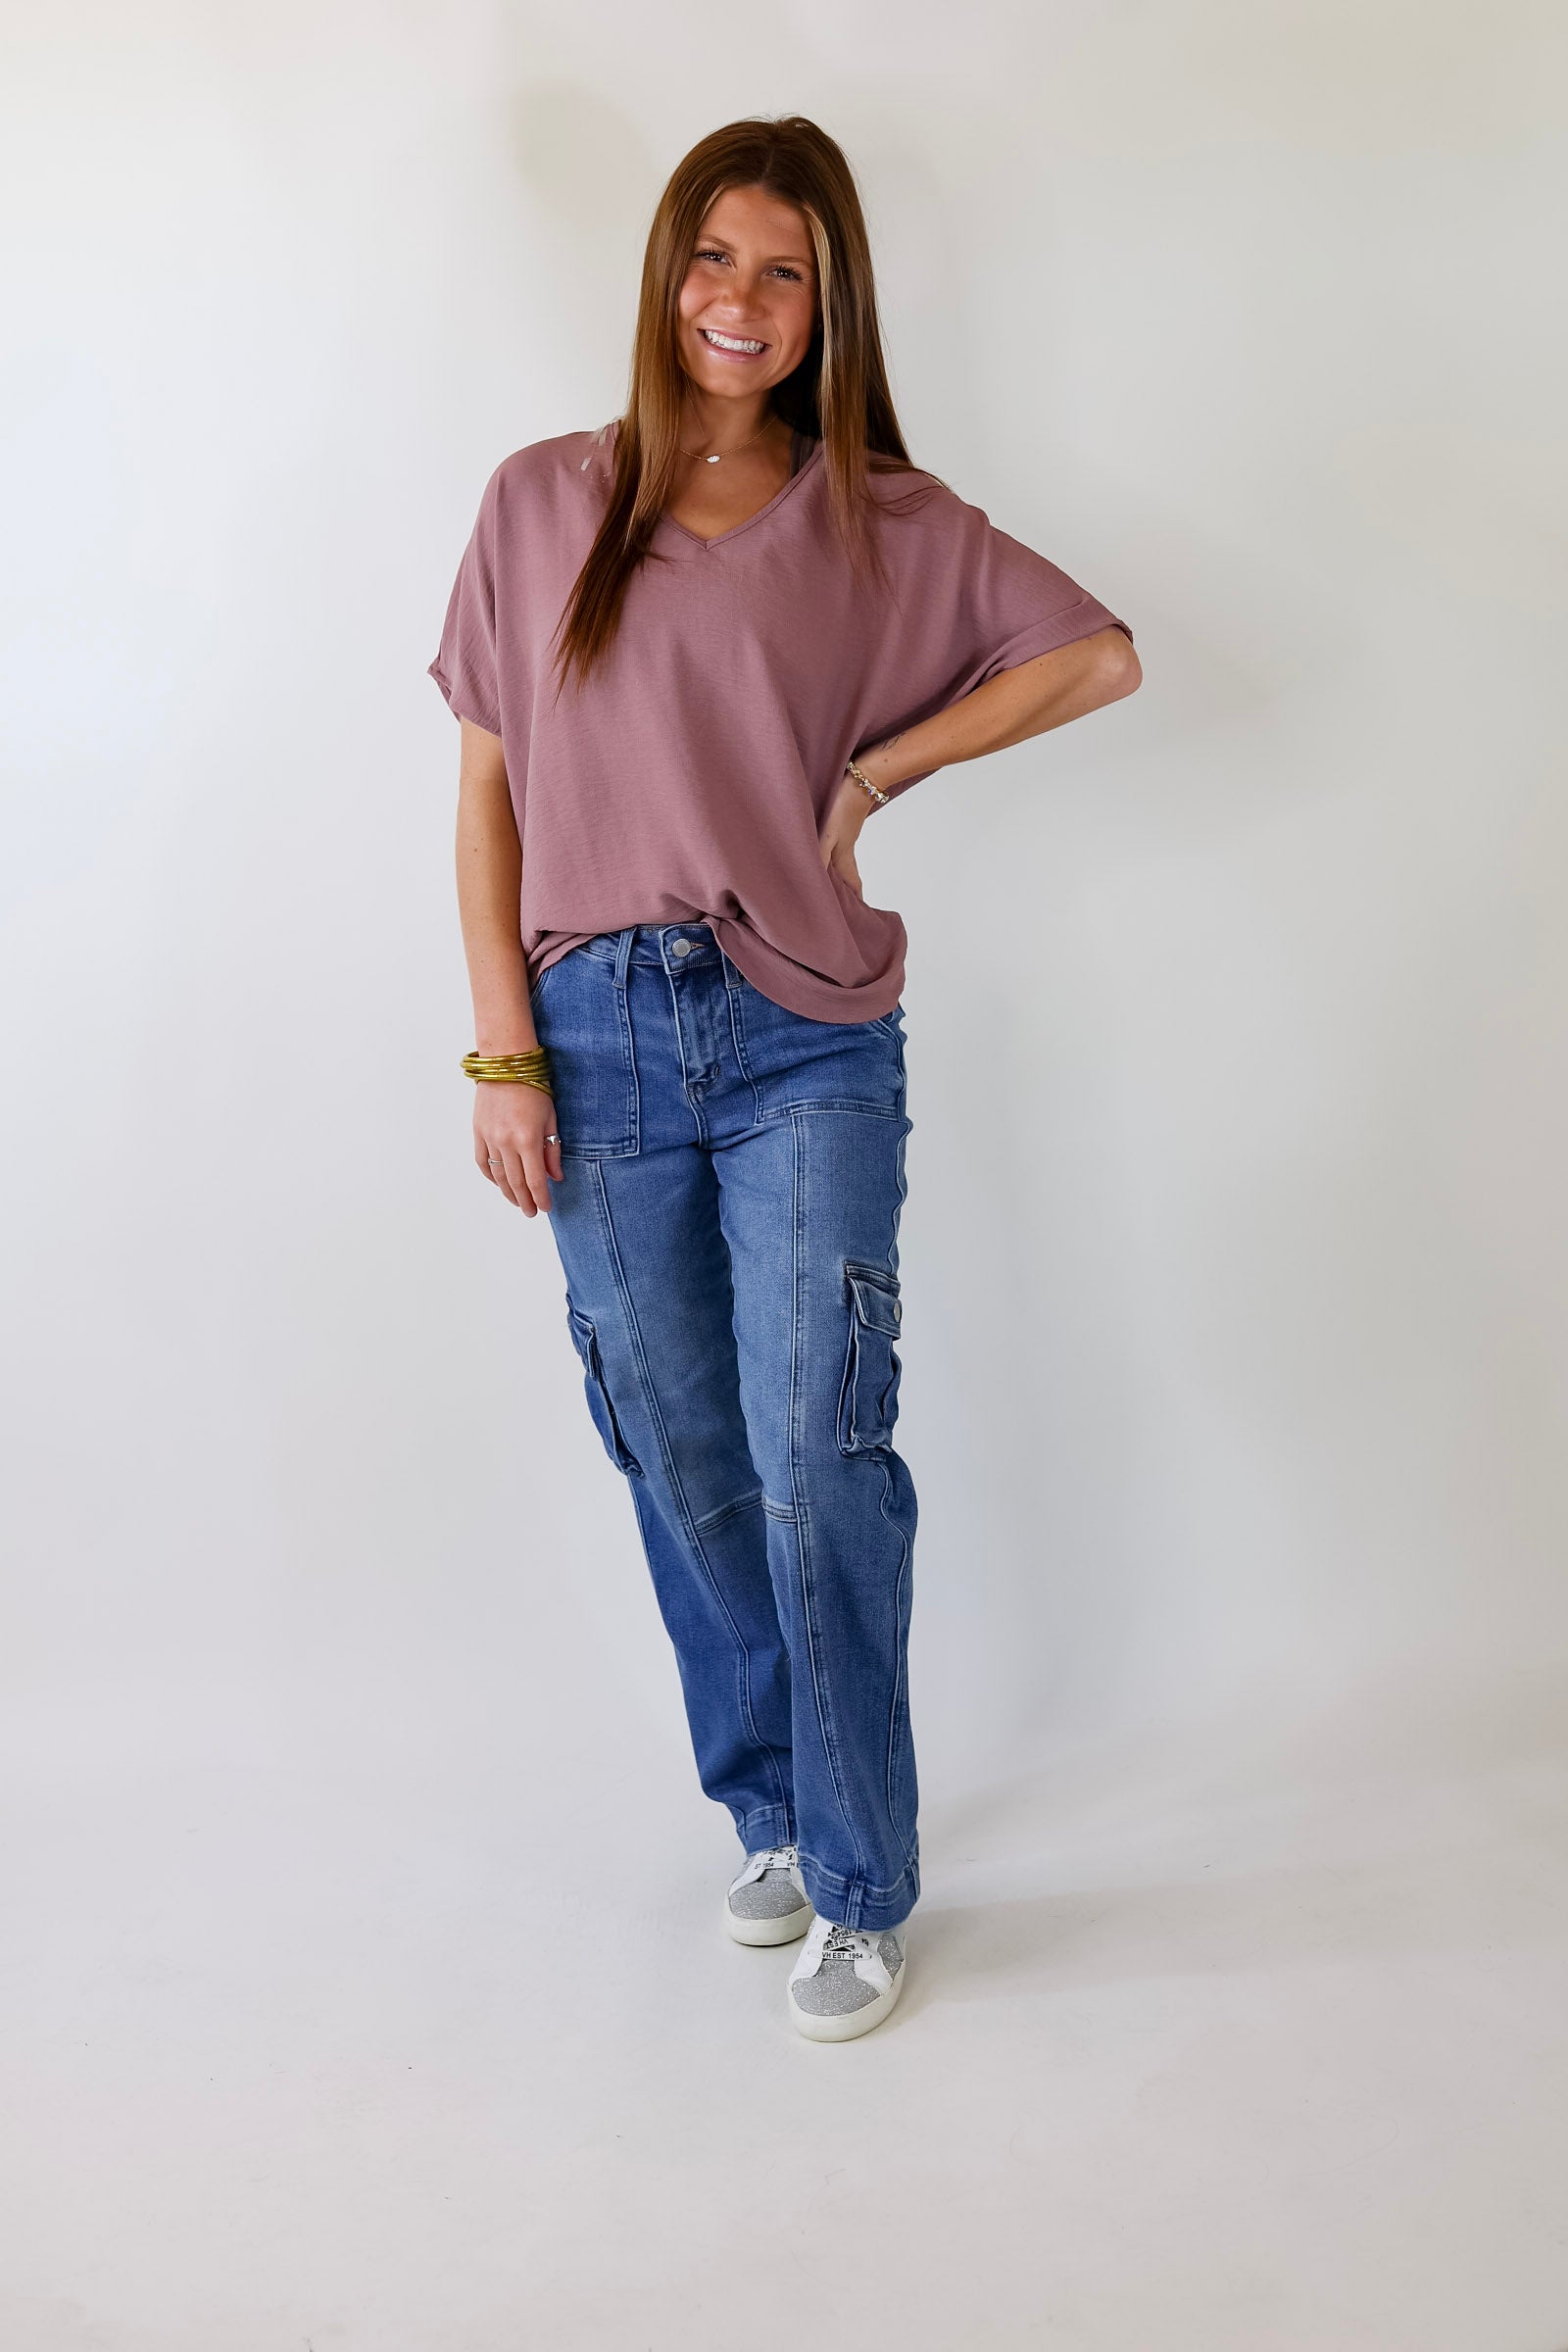 Lovely Dear V Neck Short Sleeve Solid Top in Mauve Purple - Giddy Up Glamour Boutique